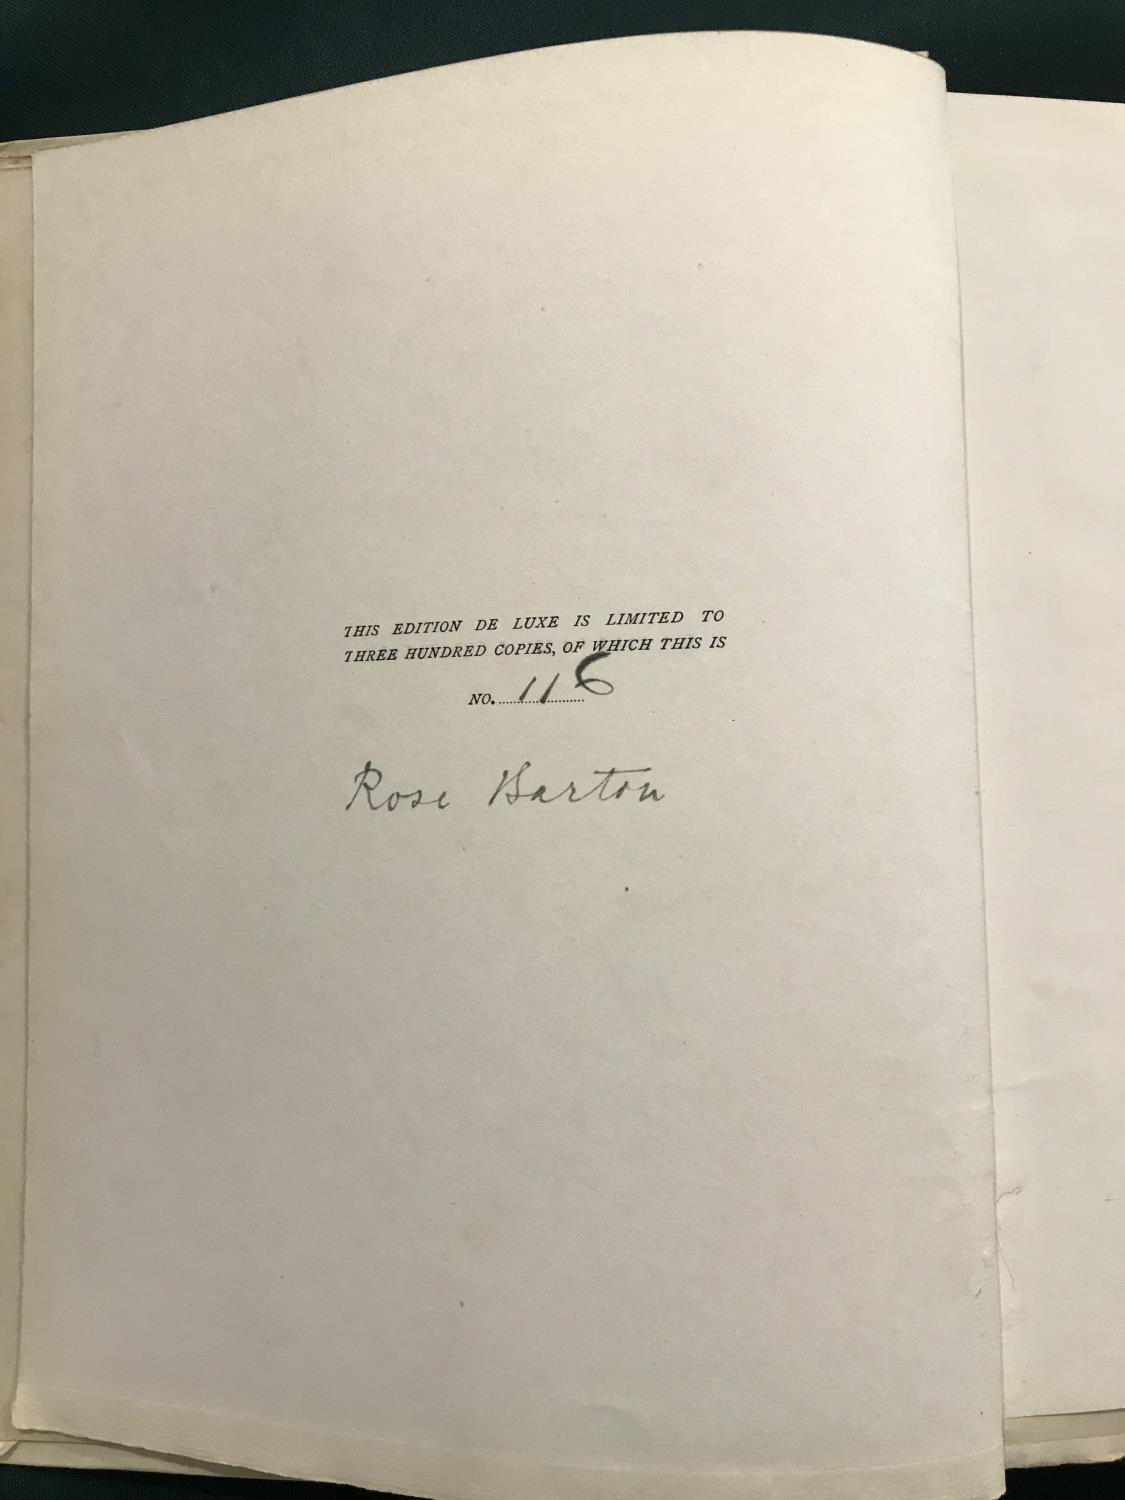 Barton, Rose. Familiar London, first edition, number 116 of 300 copies, signed by the artist, - Image 4 of 7